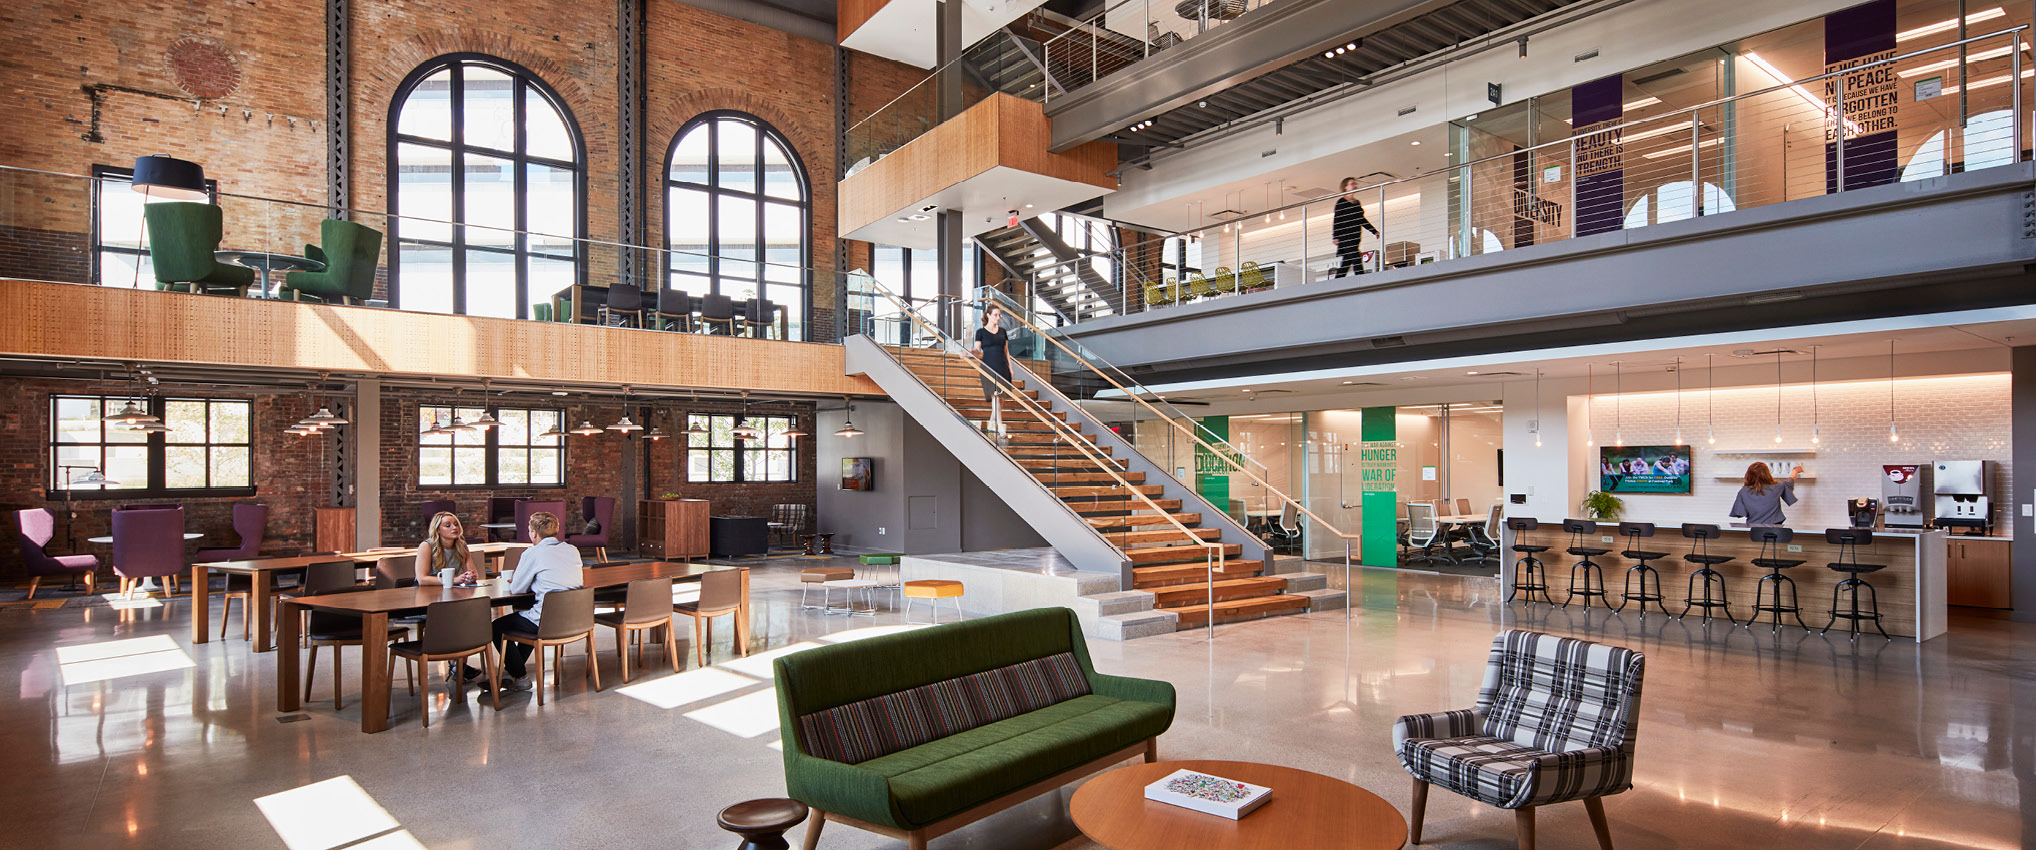 HKS Receives 2018 IDEAS2 Presidential Award of Excellence for Adaptive Reuse for ProMedica Corporate Headquarters